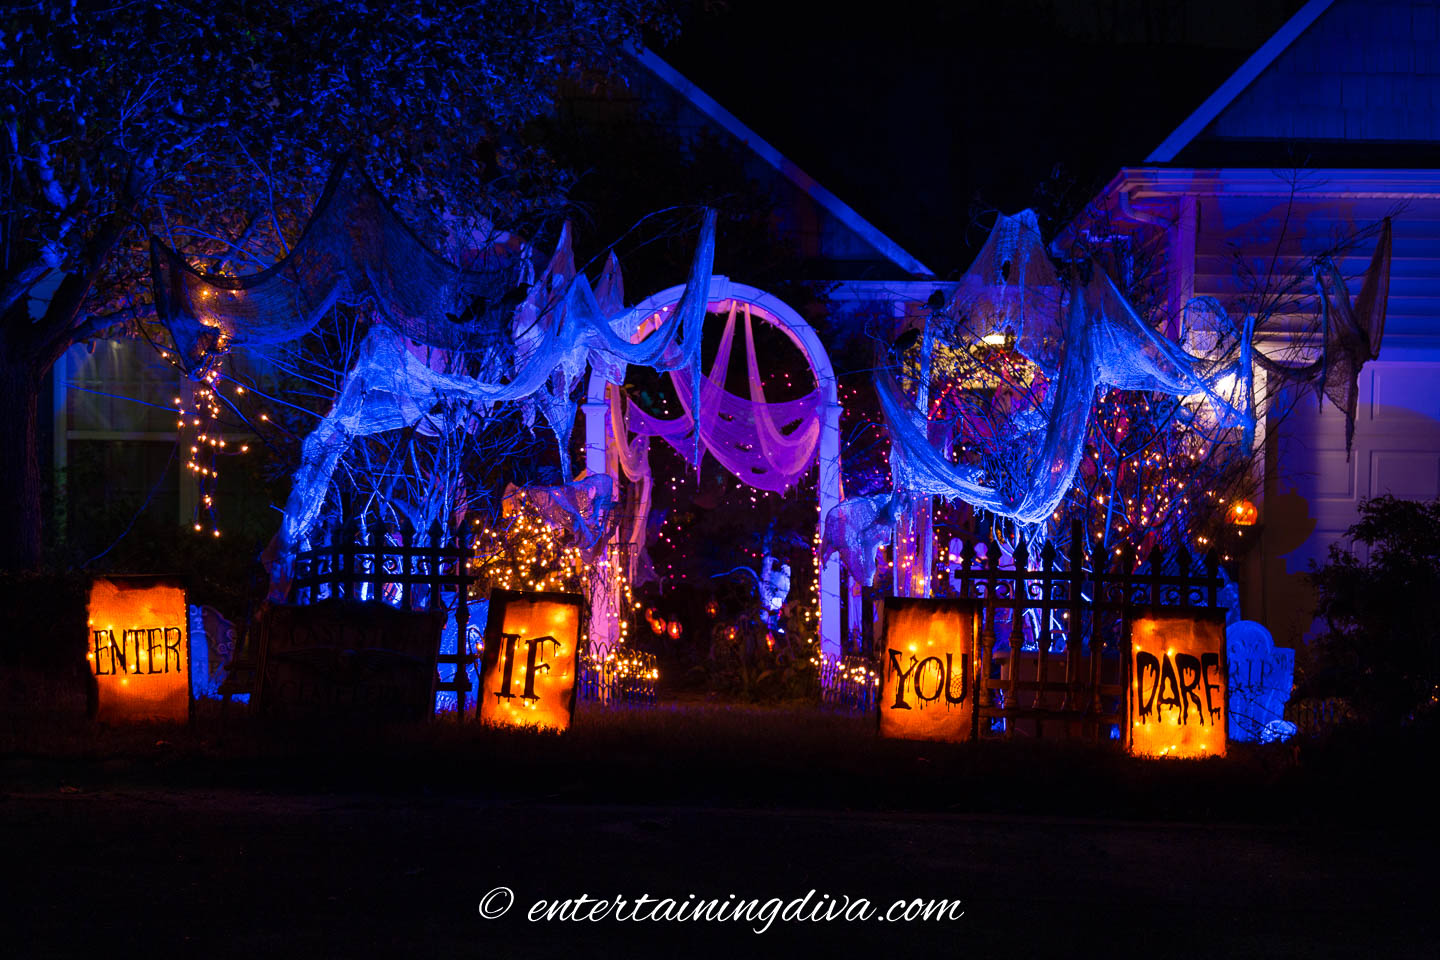 A front yard decorated with blue and orange Halloween outdoor lighting and "Enter If You Dare" luminaries